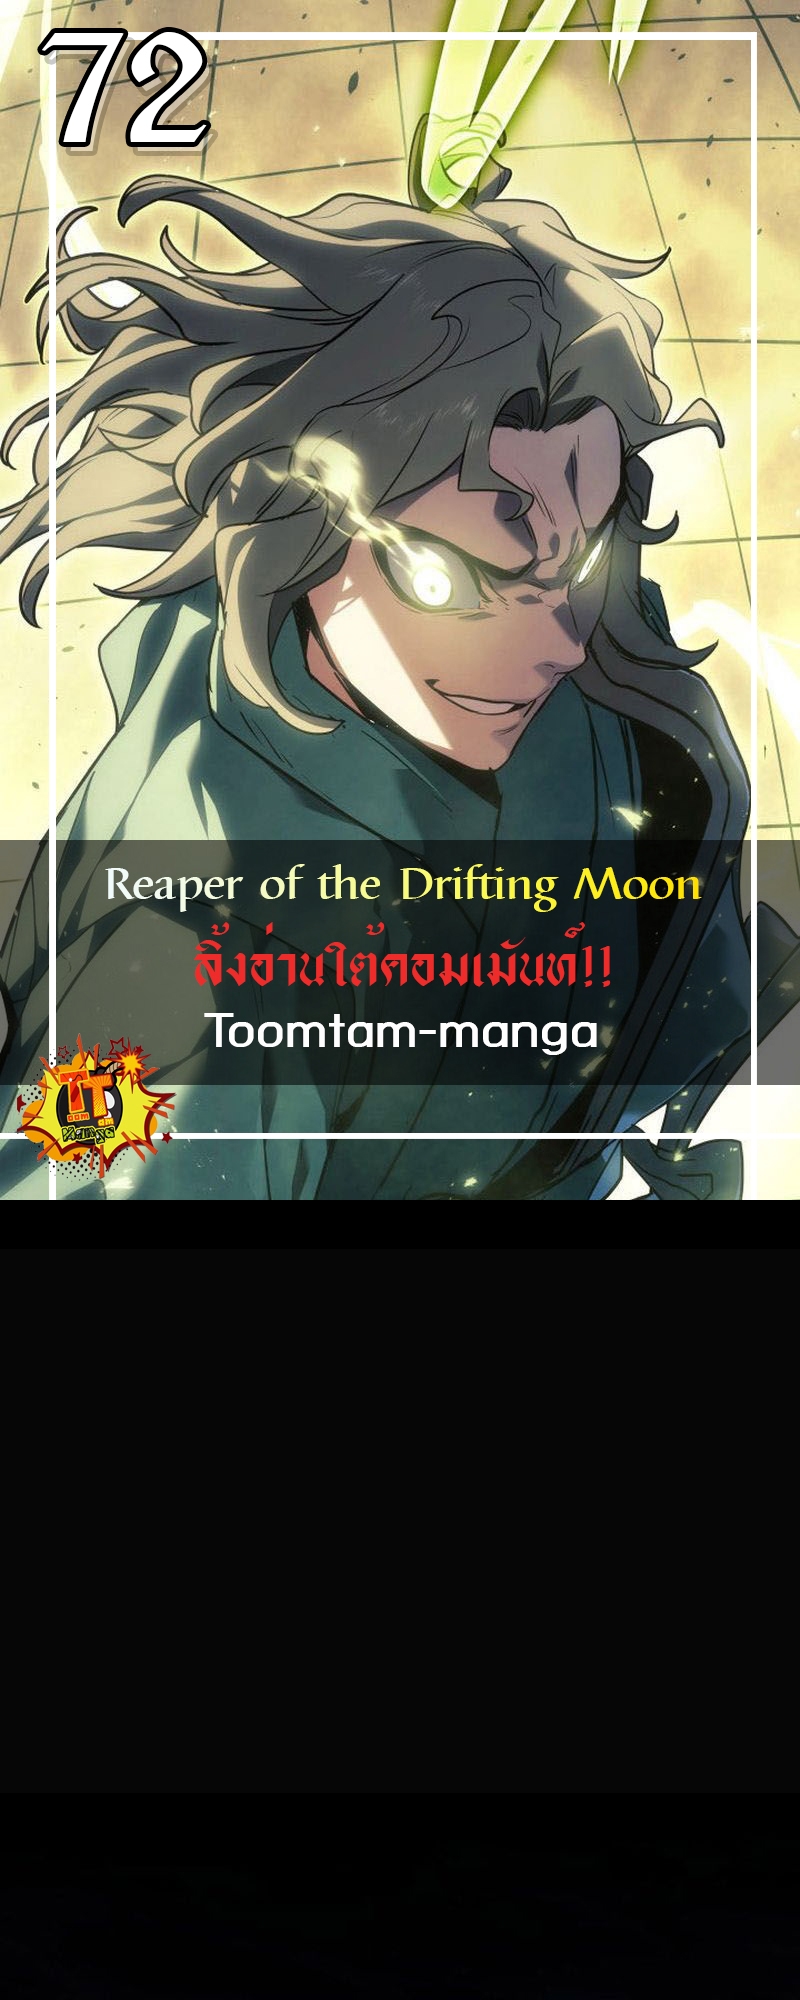 Reaper of the Drifting Moon 72 25 1 25670001